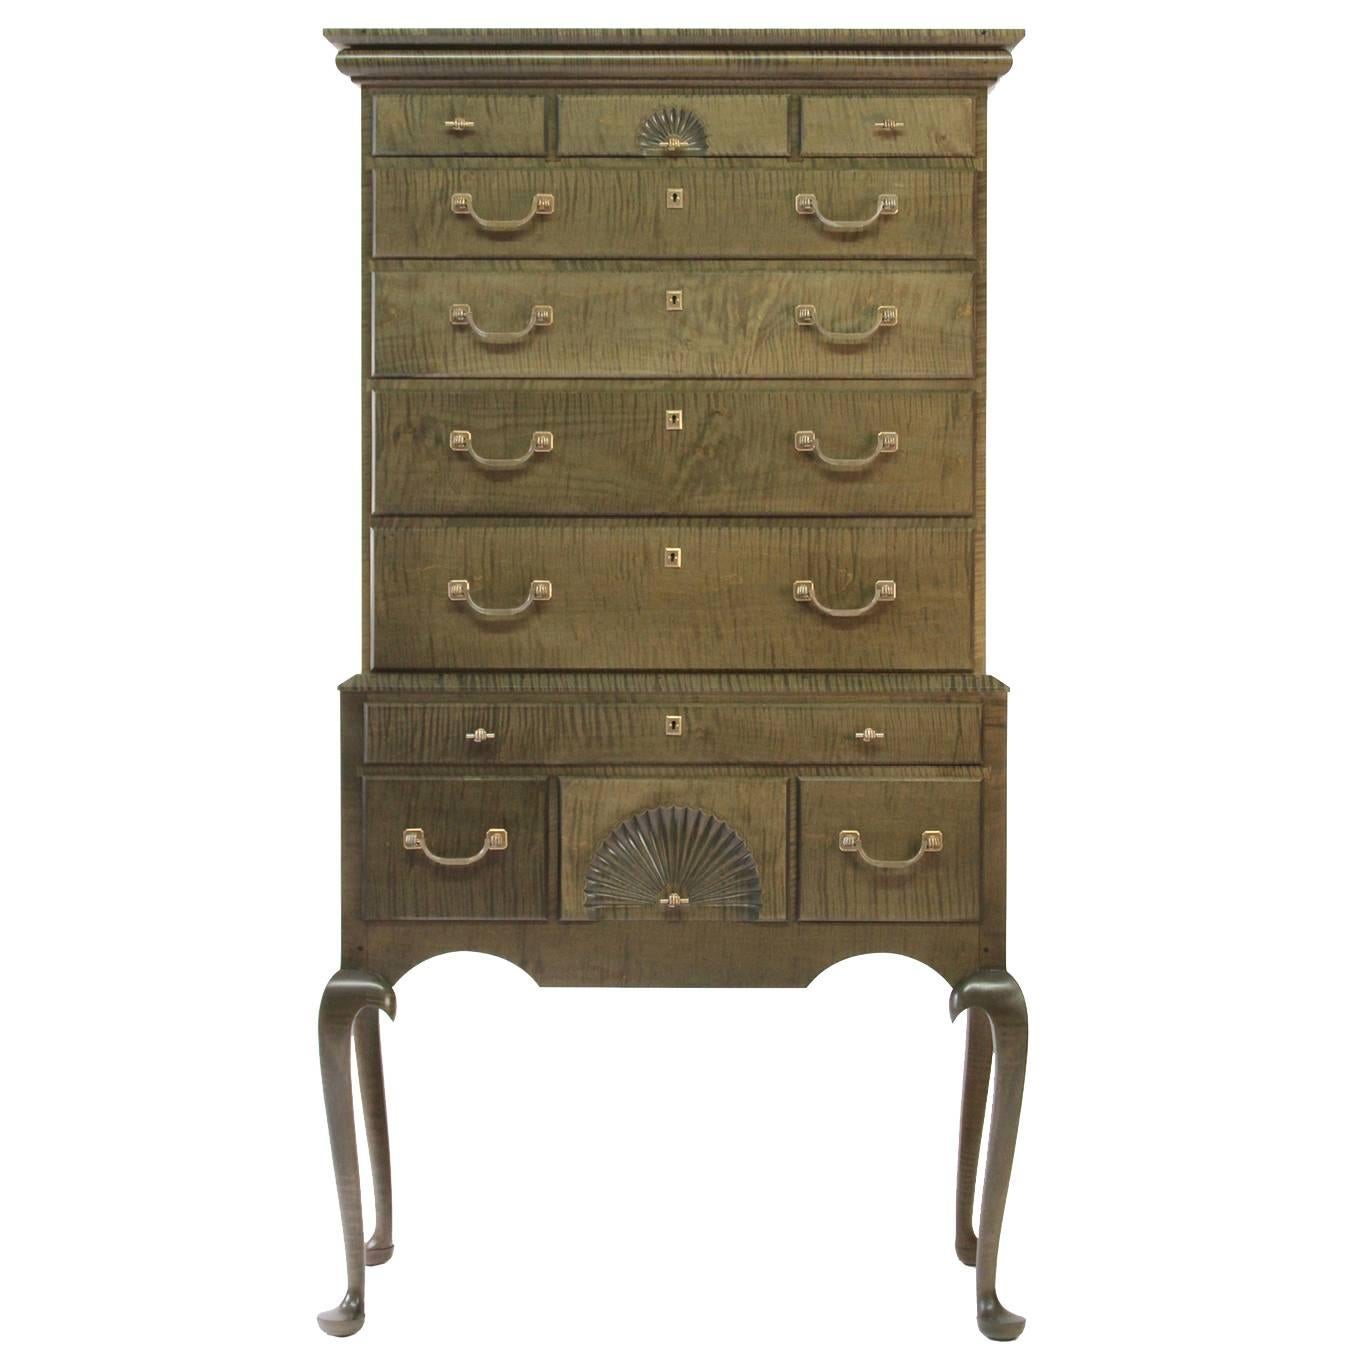 O&G Tiger Maple Highboy with Cast Bronze Fist or Hand Hardware For Sale